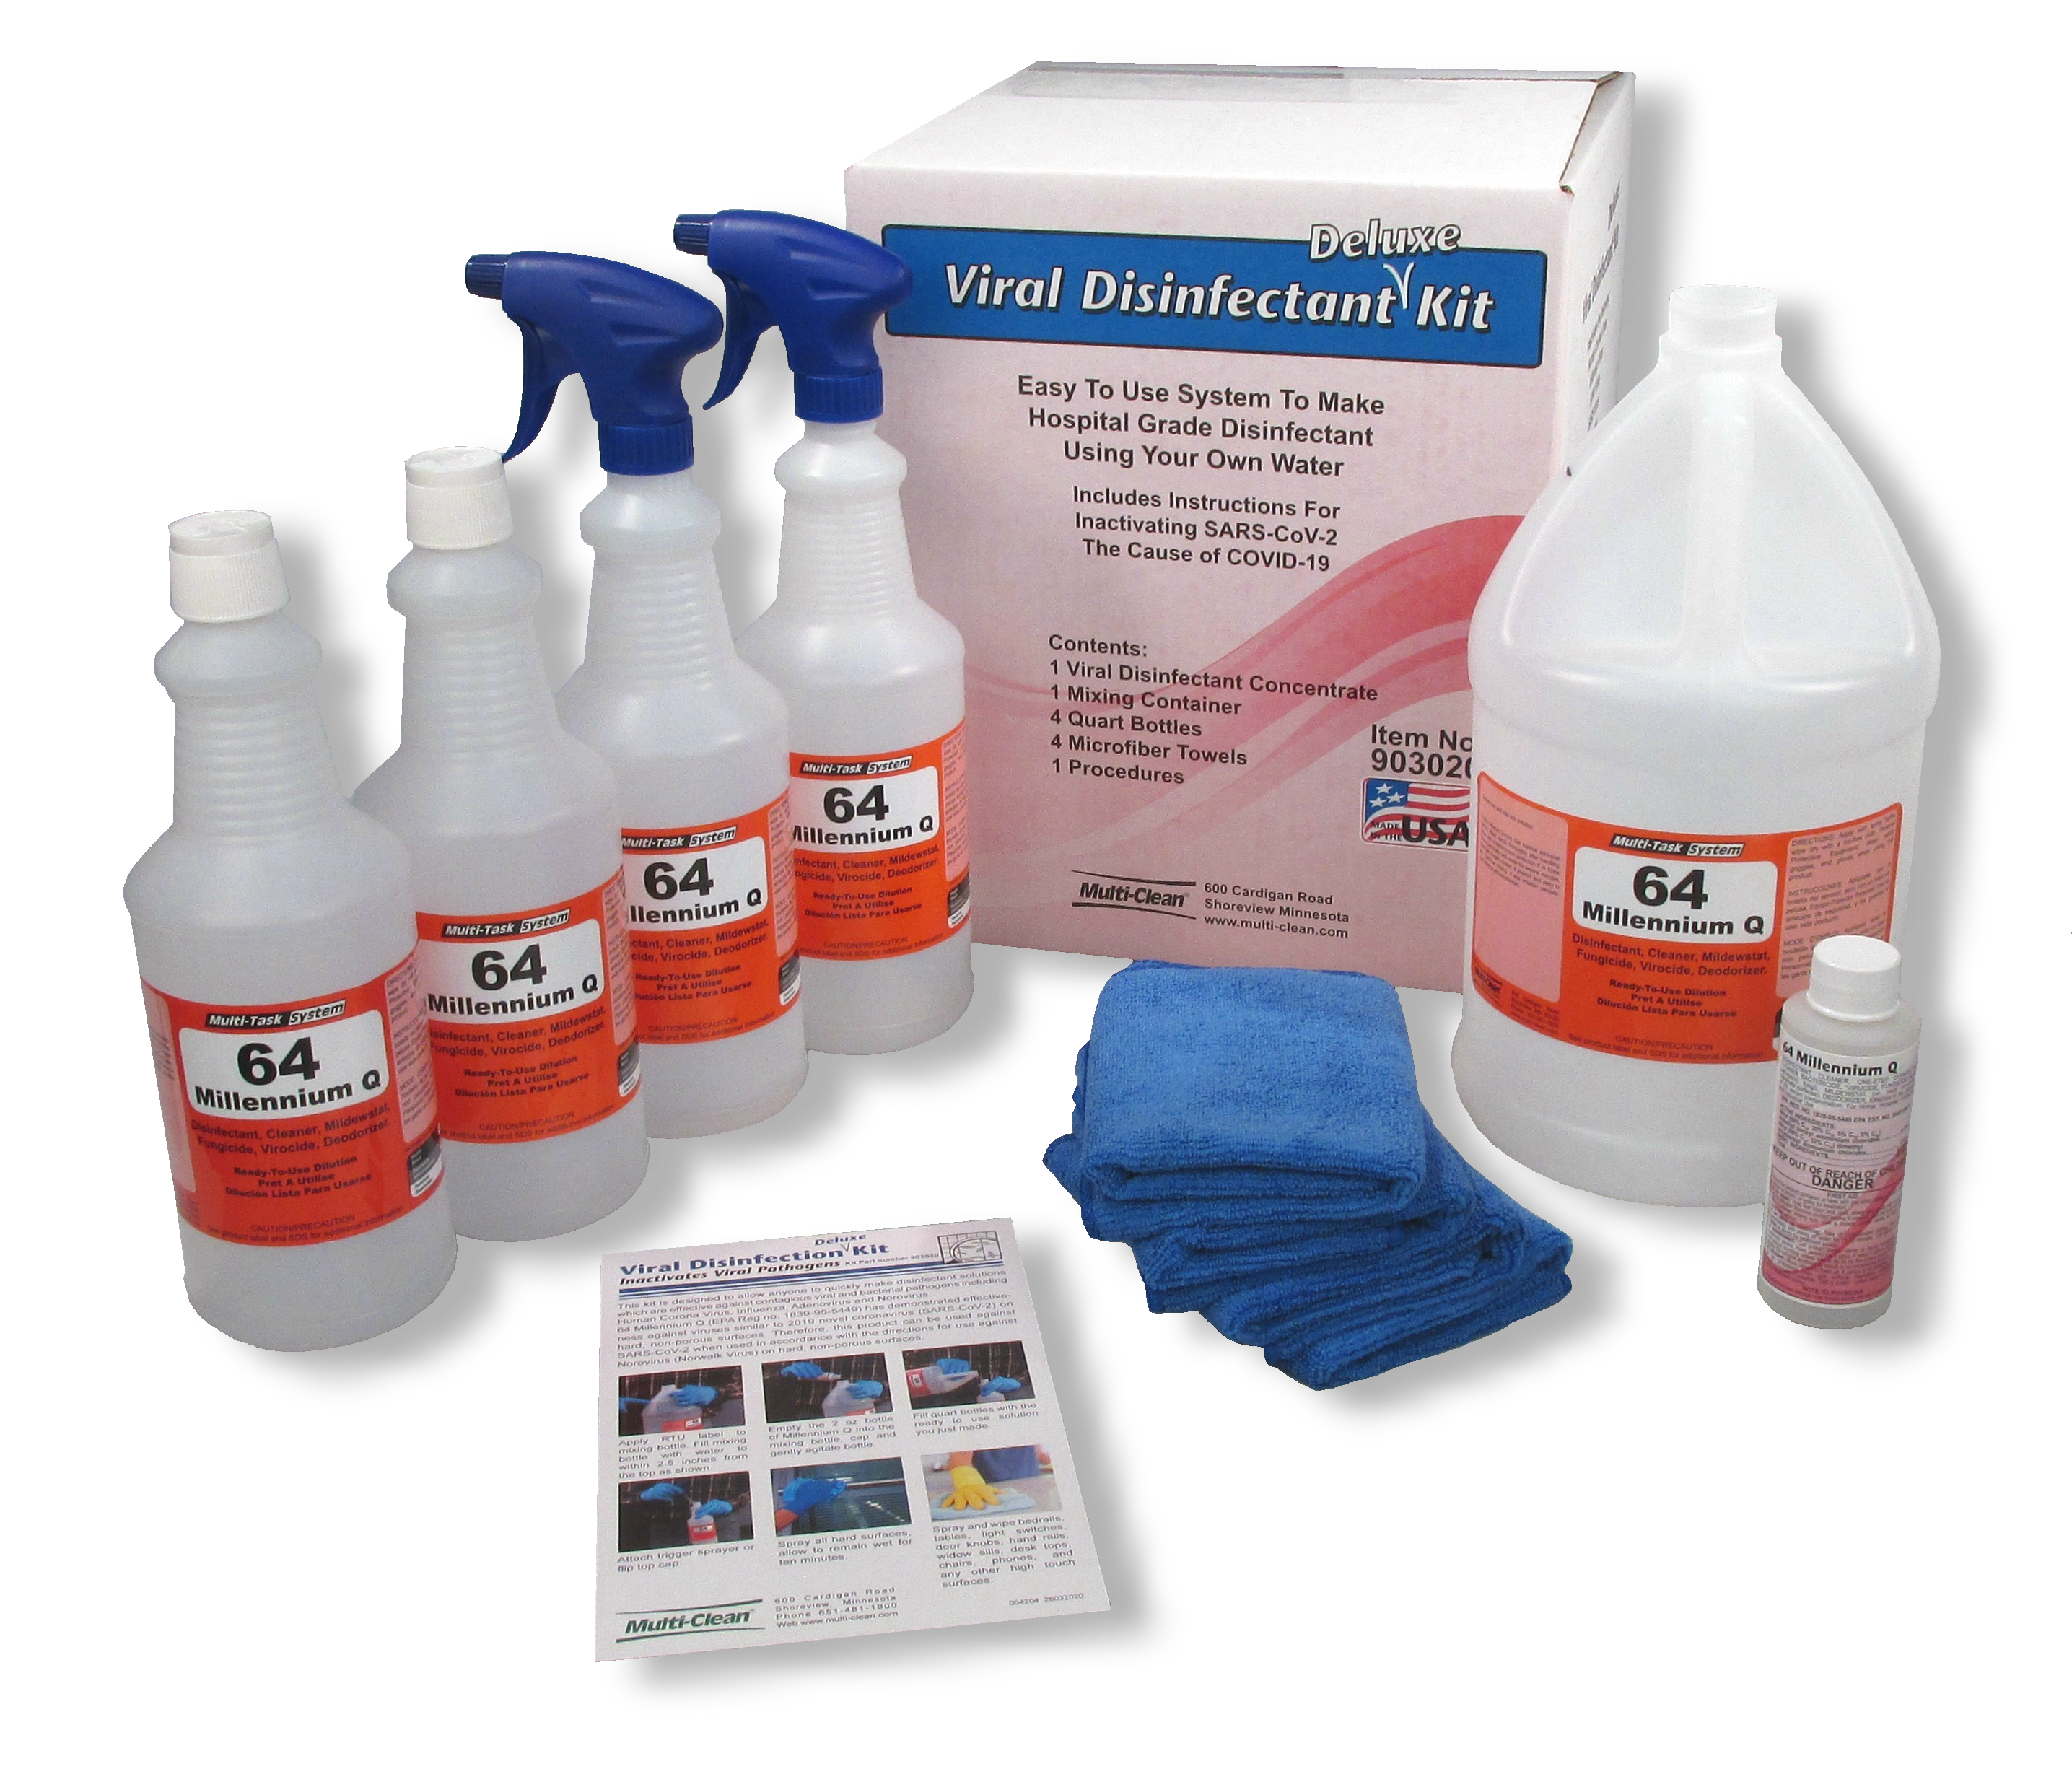 Viral Disinfection deluxe Kit